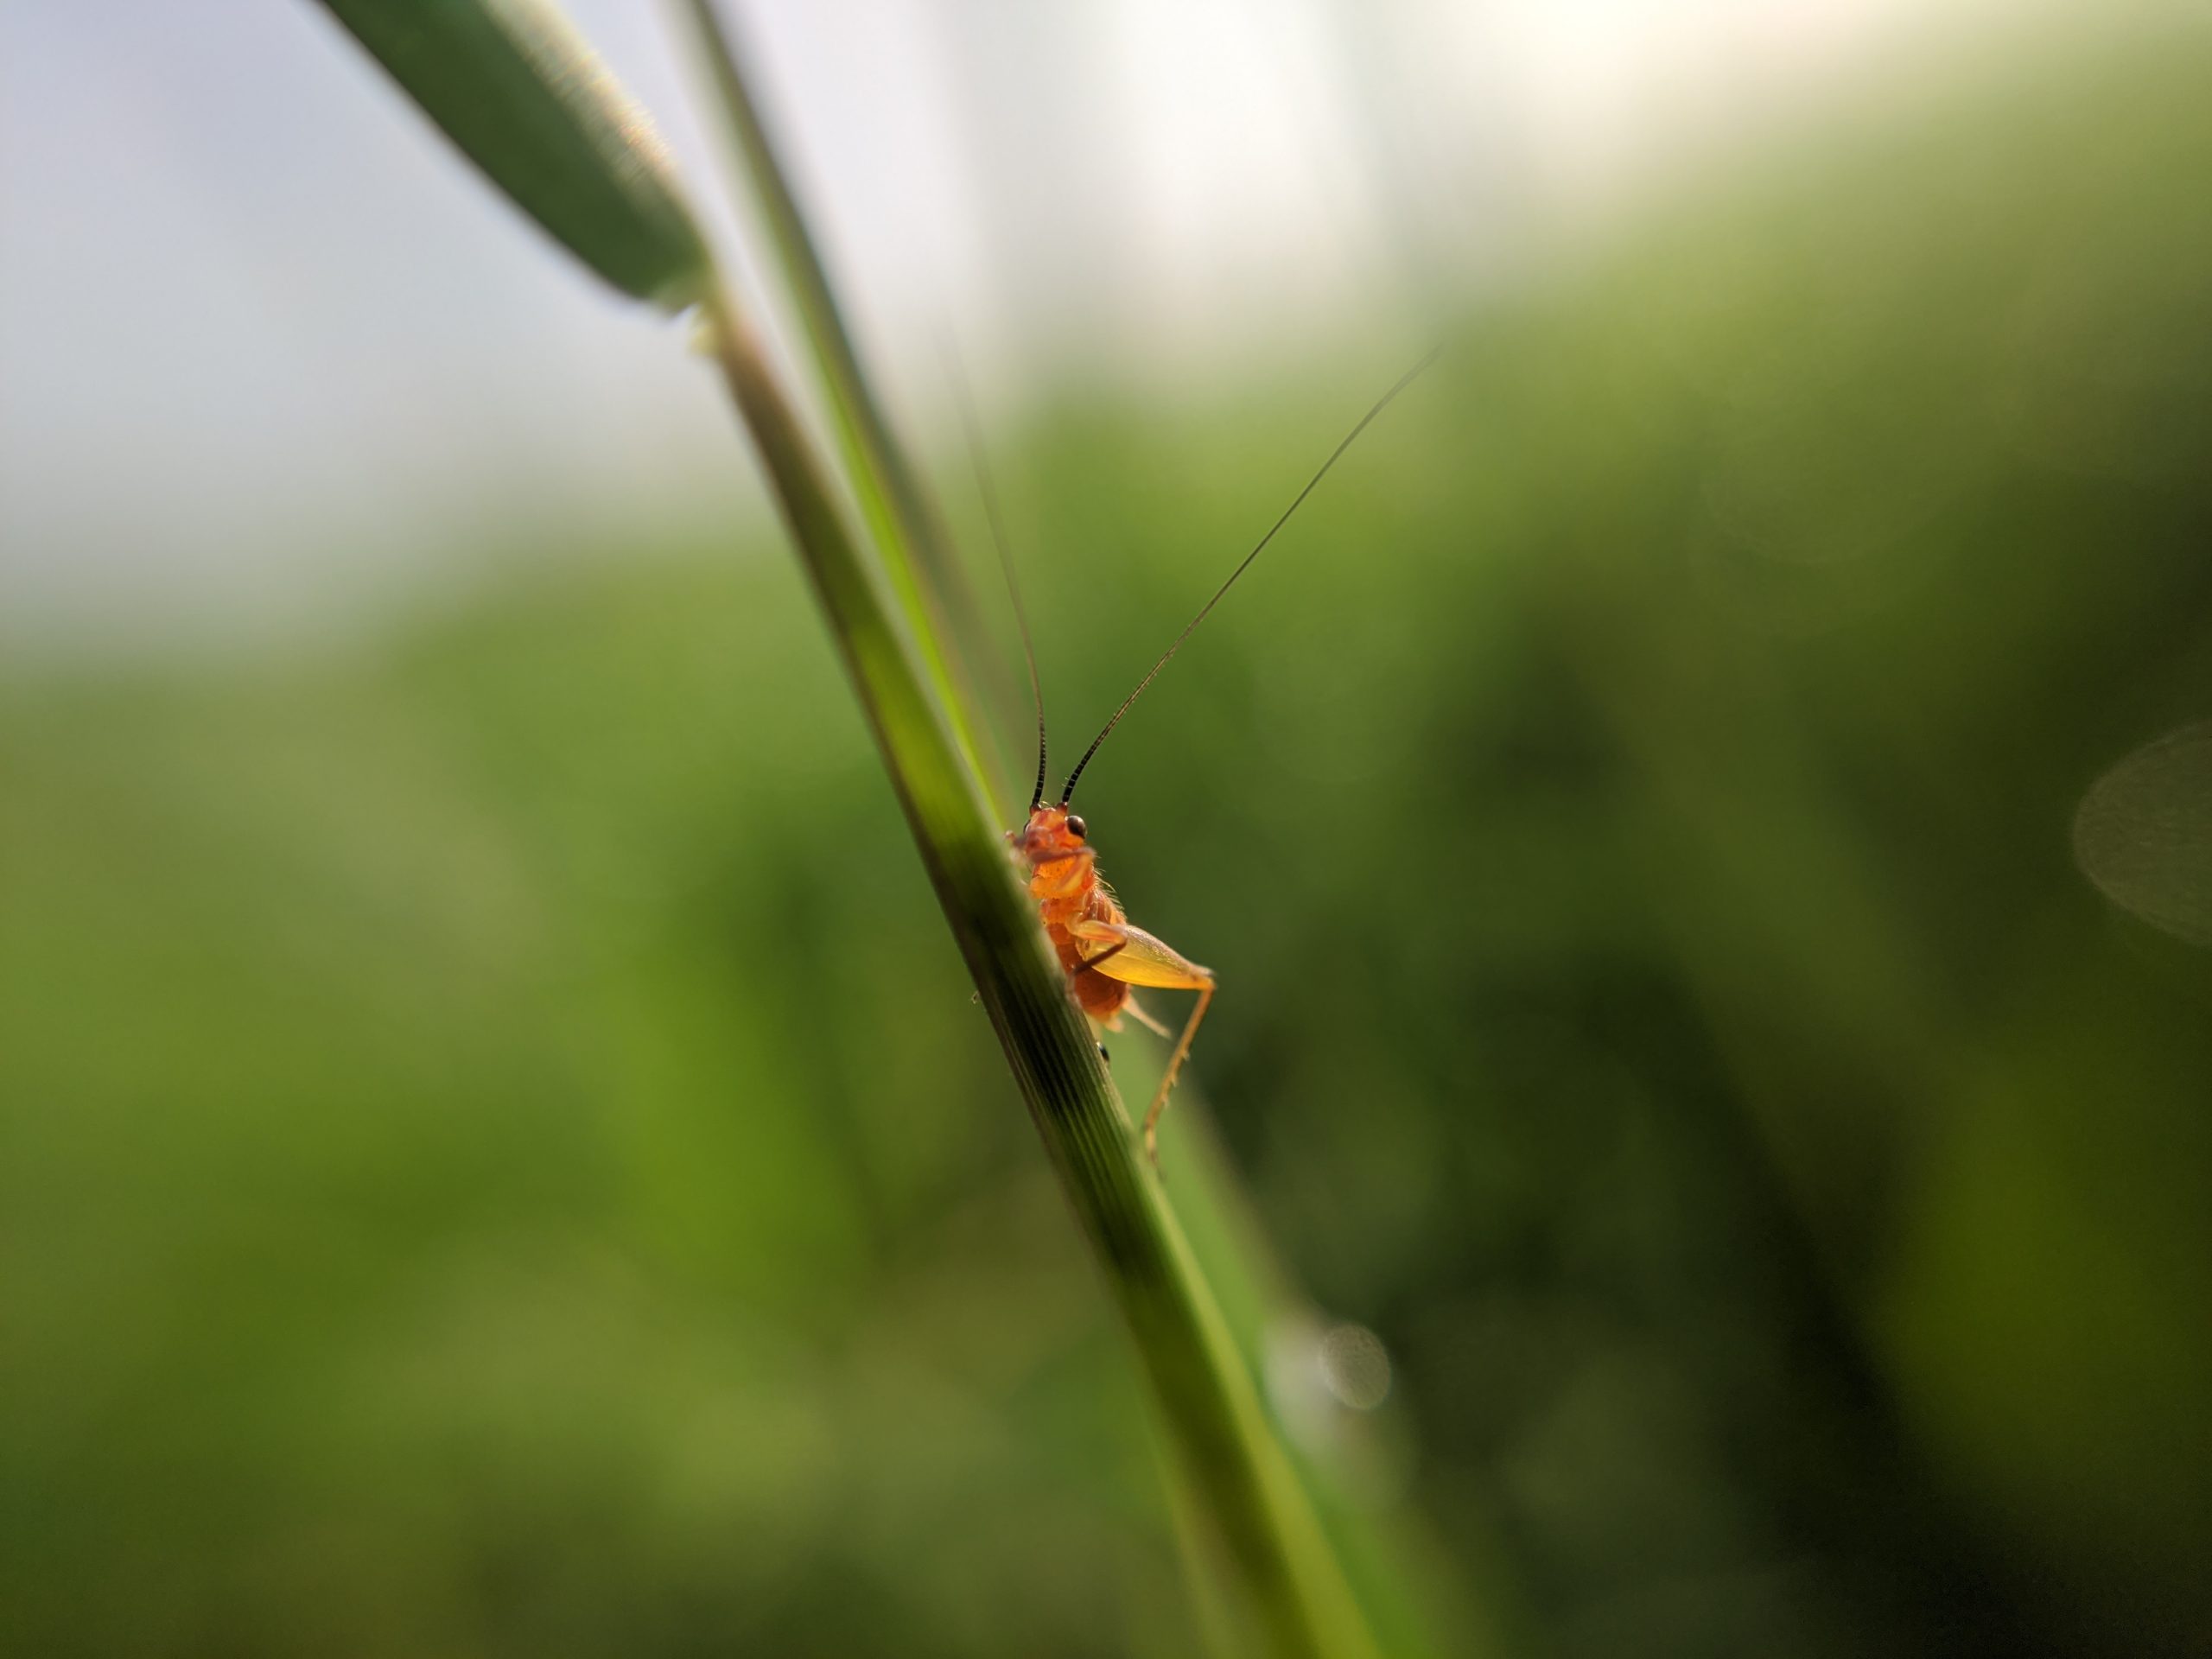 Insect on a plant stem